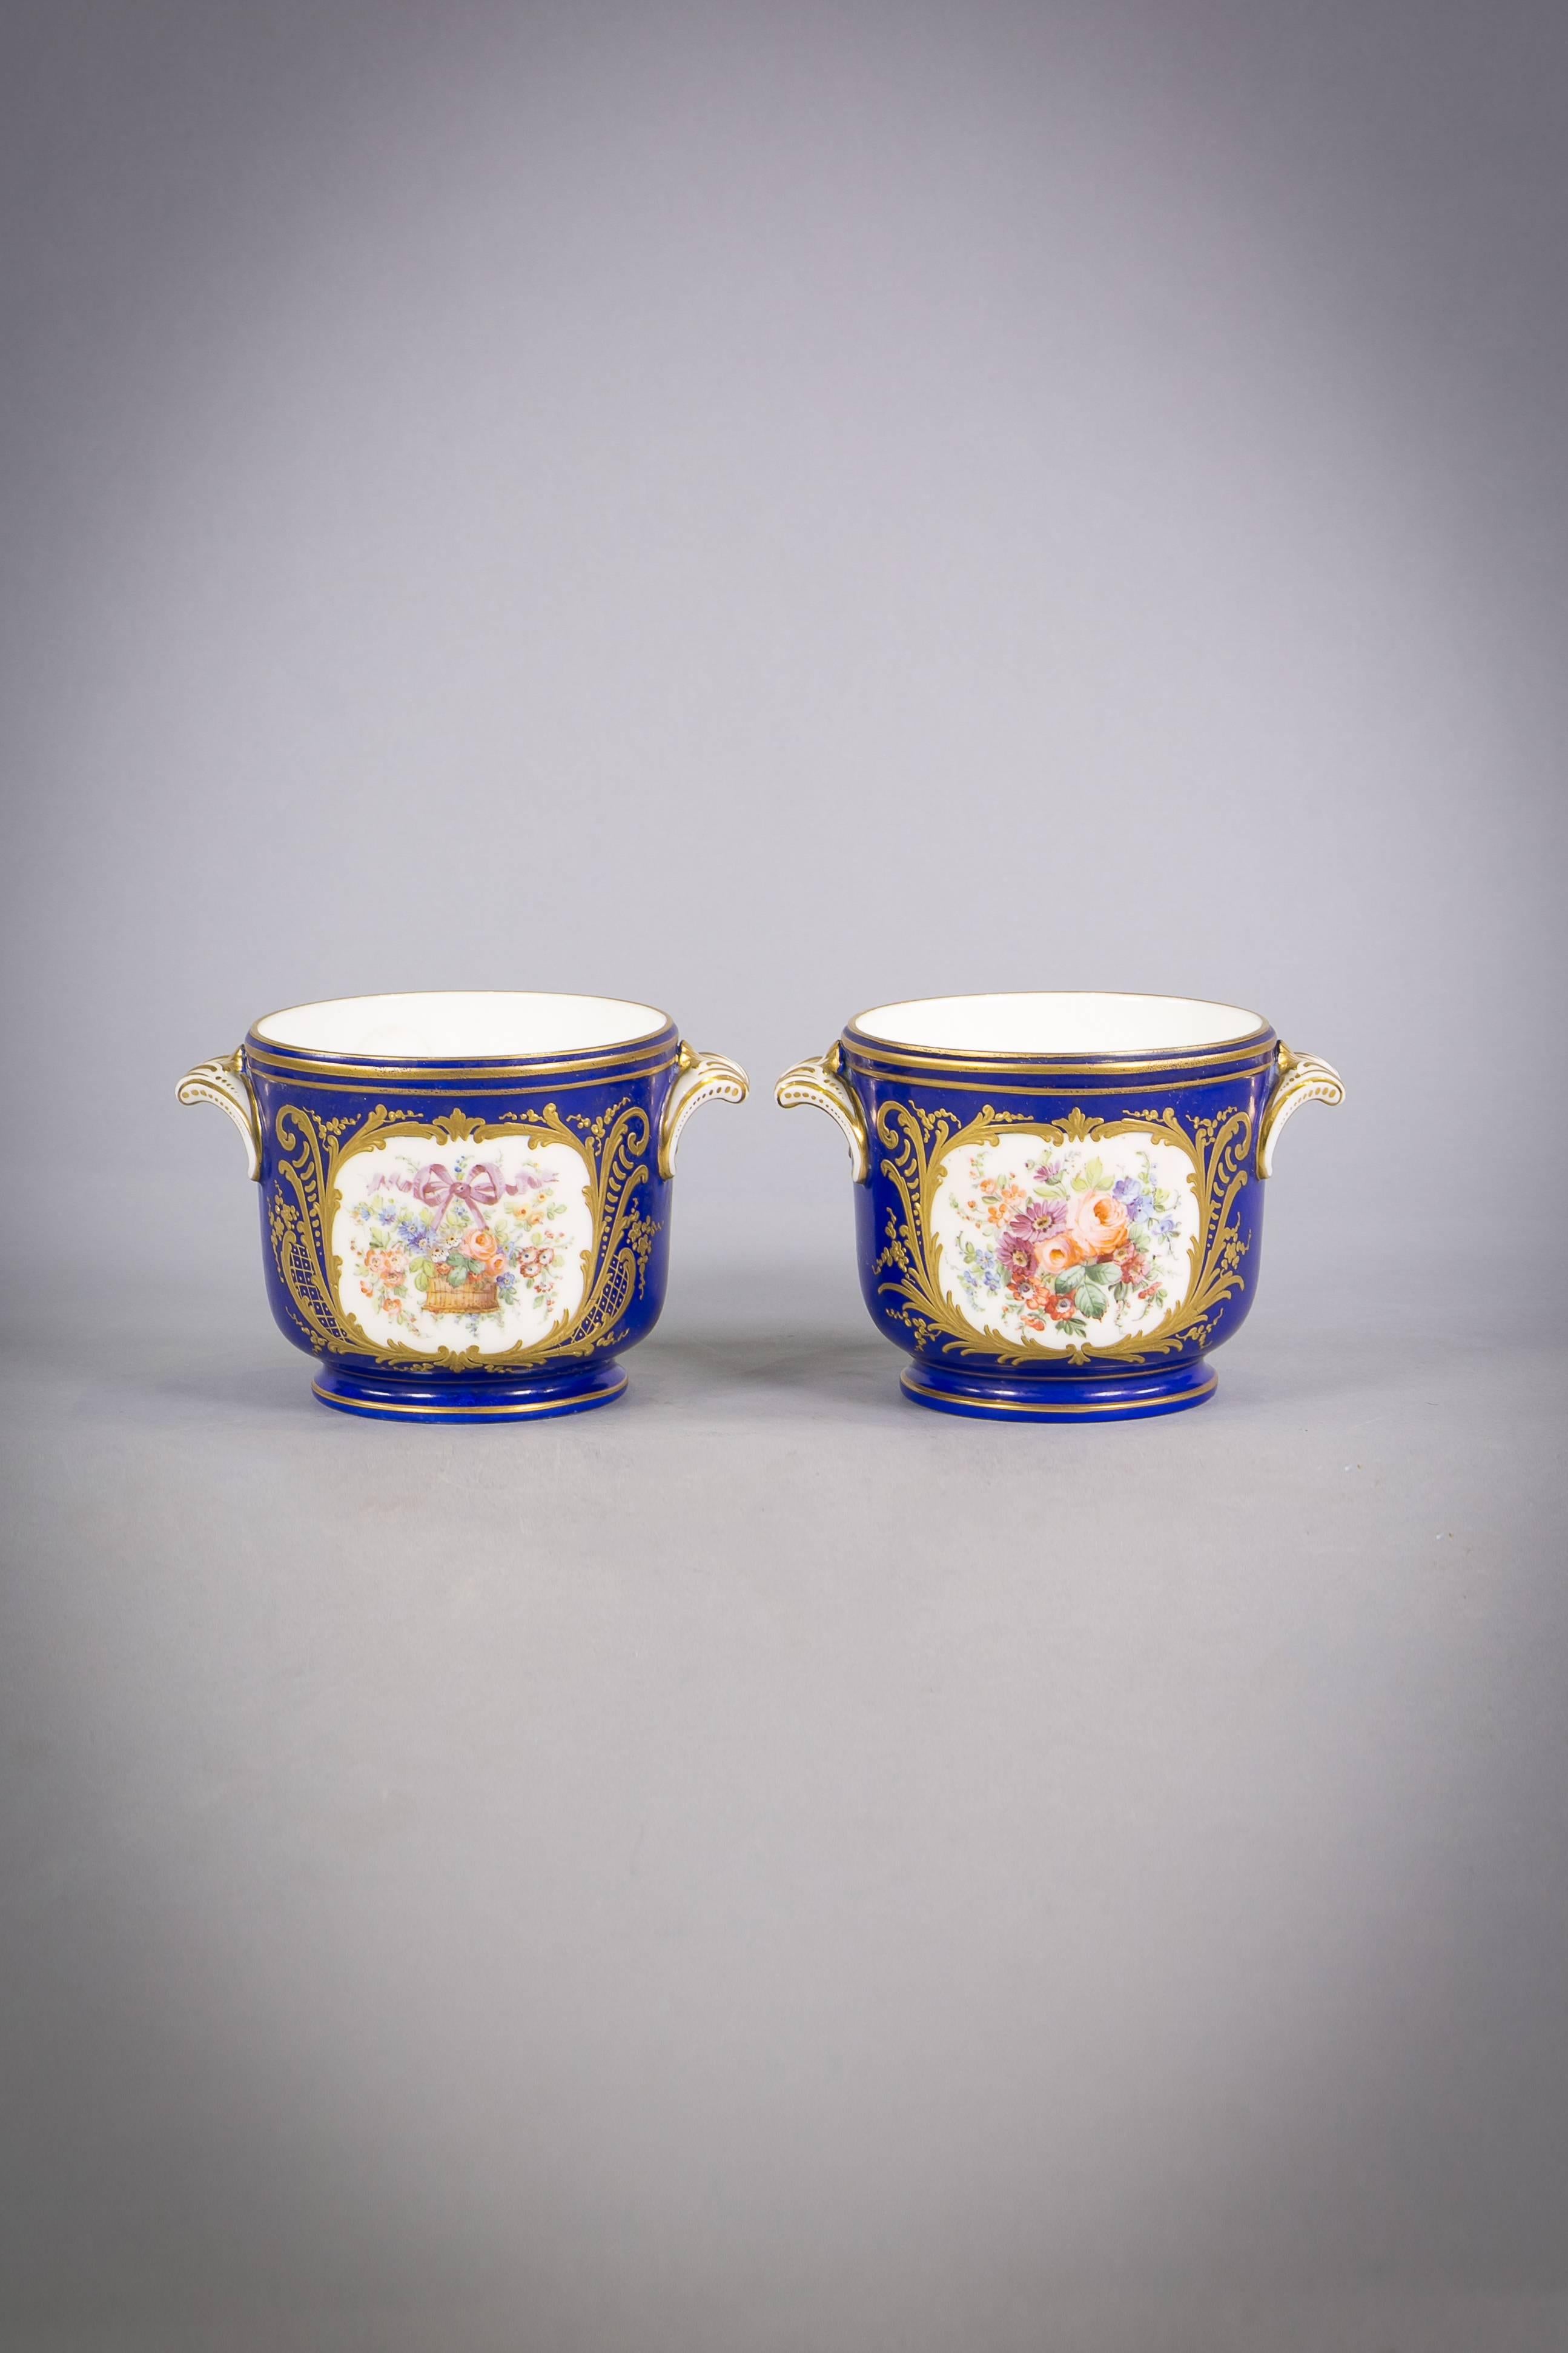 Pair of French Porcelain cachepots, circa 1860.